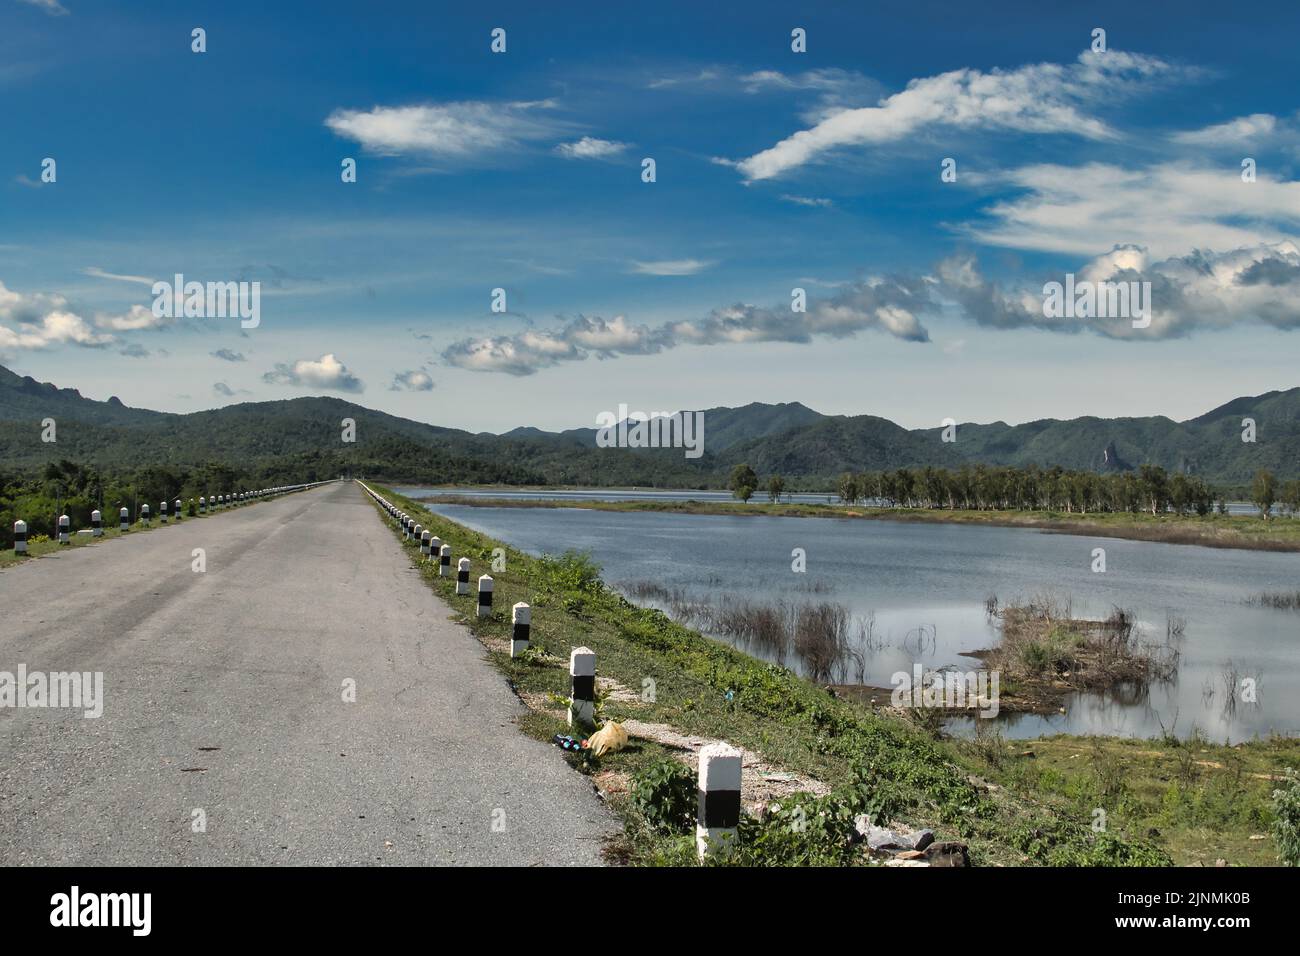 Road along one of the many reservoirs in the mountainous province of Lampang, Thailand, not far from the town of Li. Stock Photo